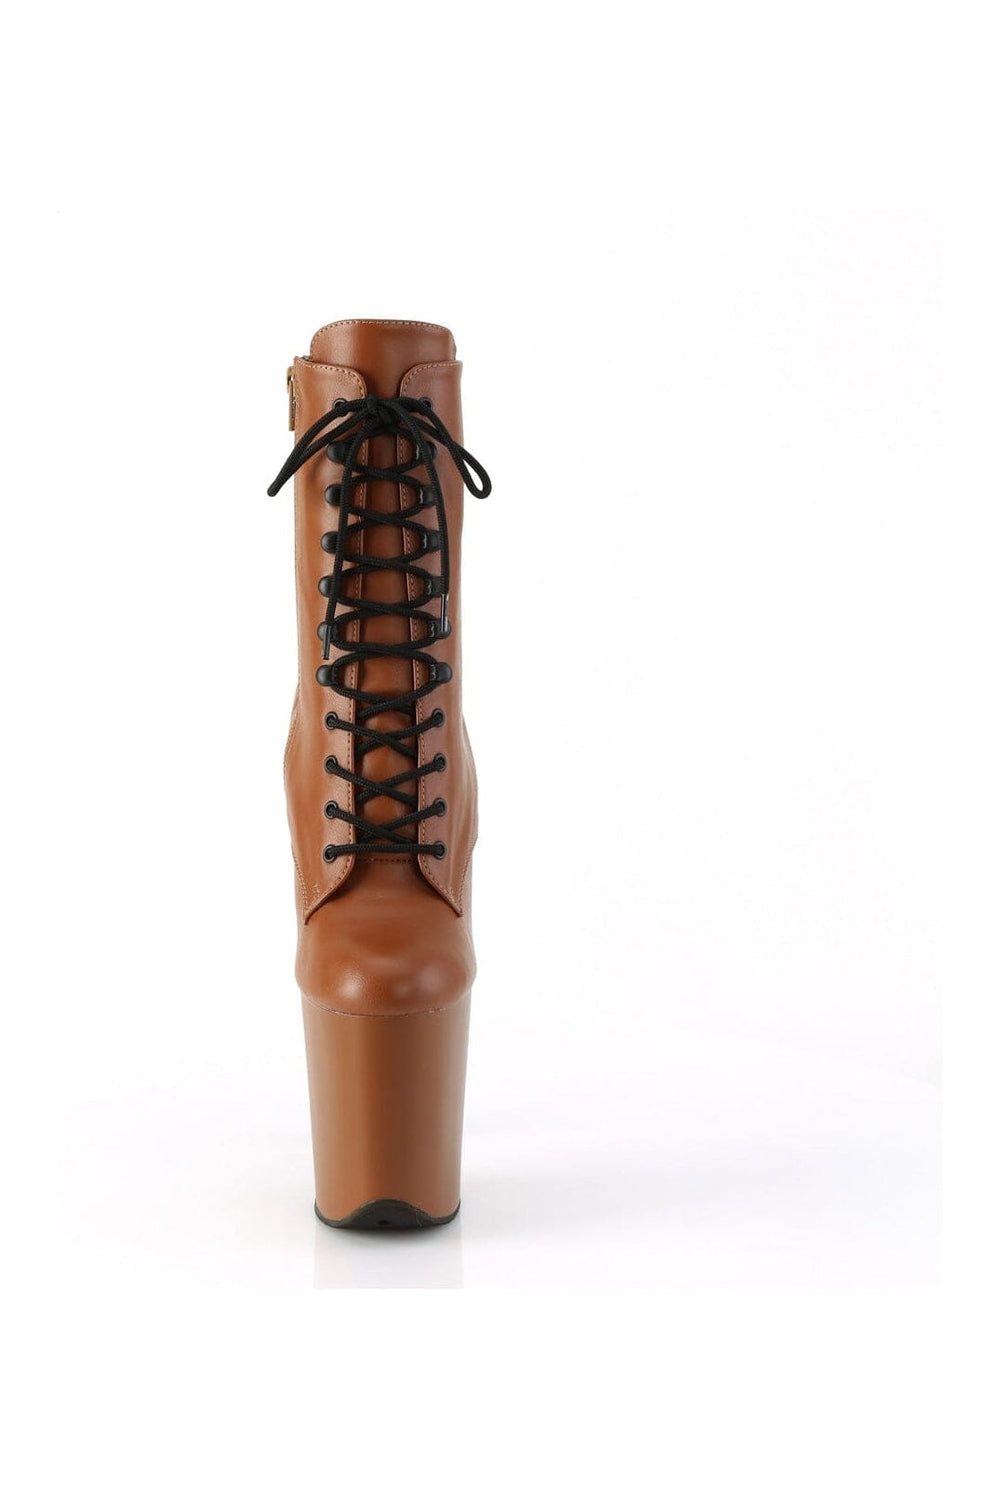 FLAMINGO-1020 Brown Faux Leather Ankle Boot-Ankle Boots-Pleaser-SEXYSHOES.COM